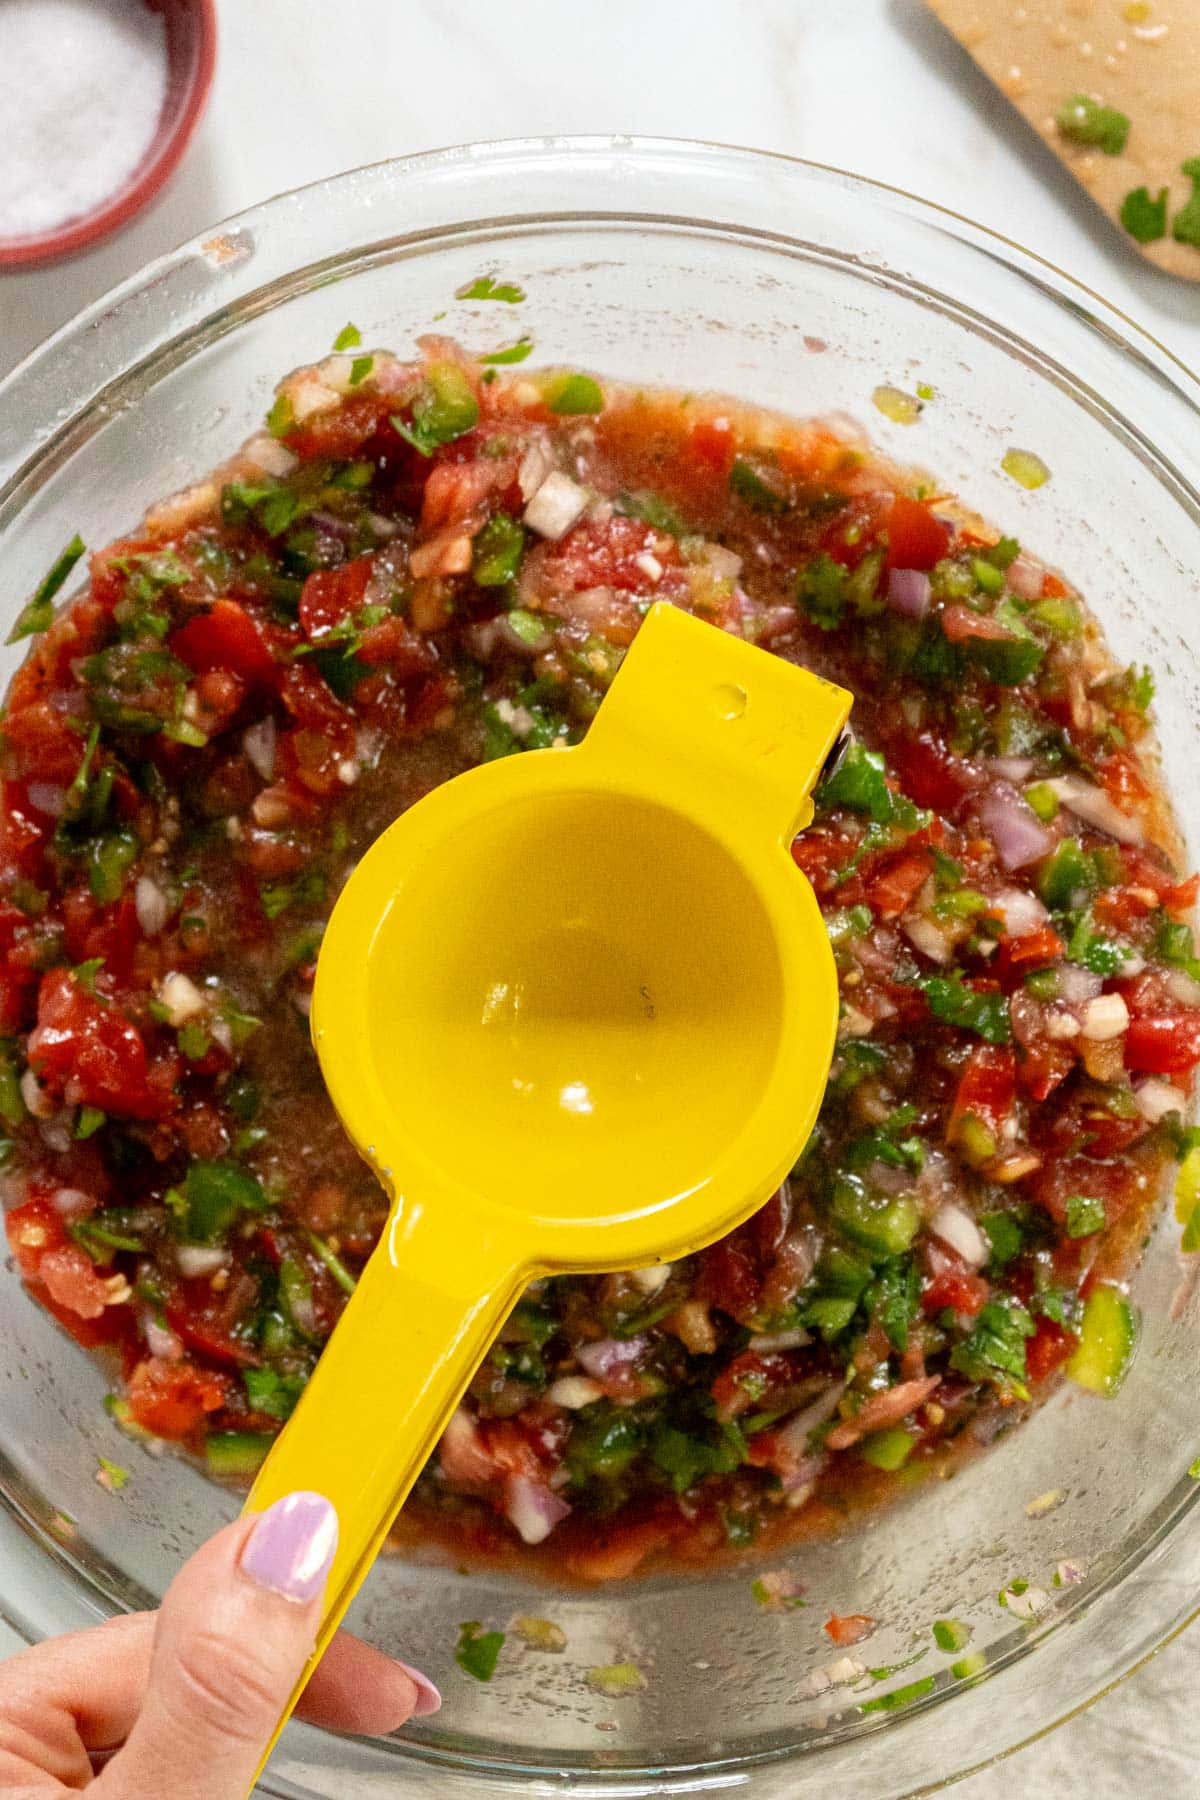 Squeezing fresh lime into the salsa.